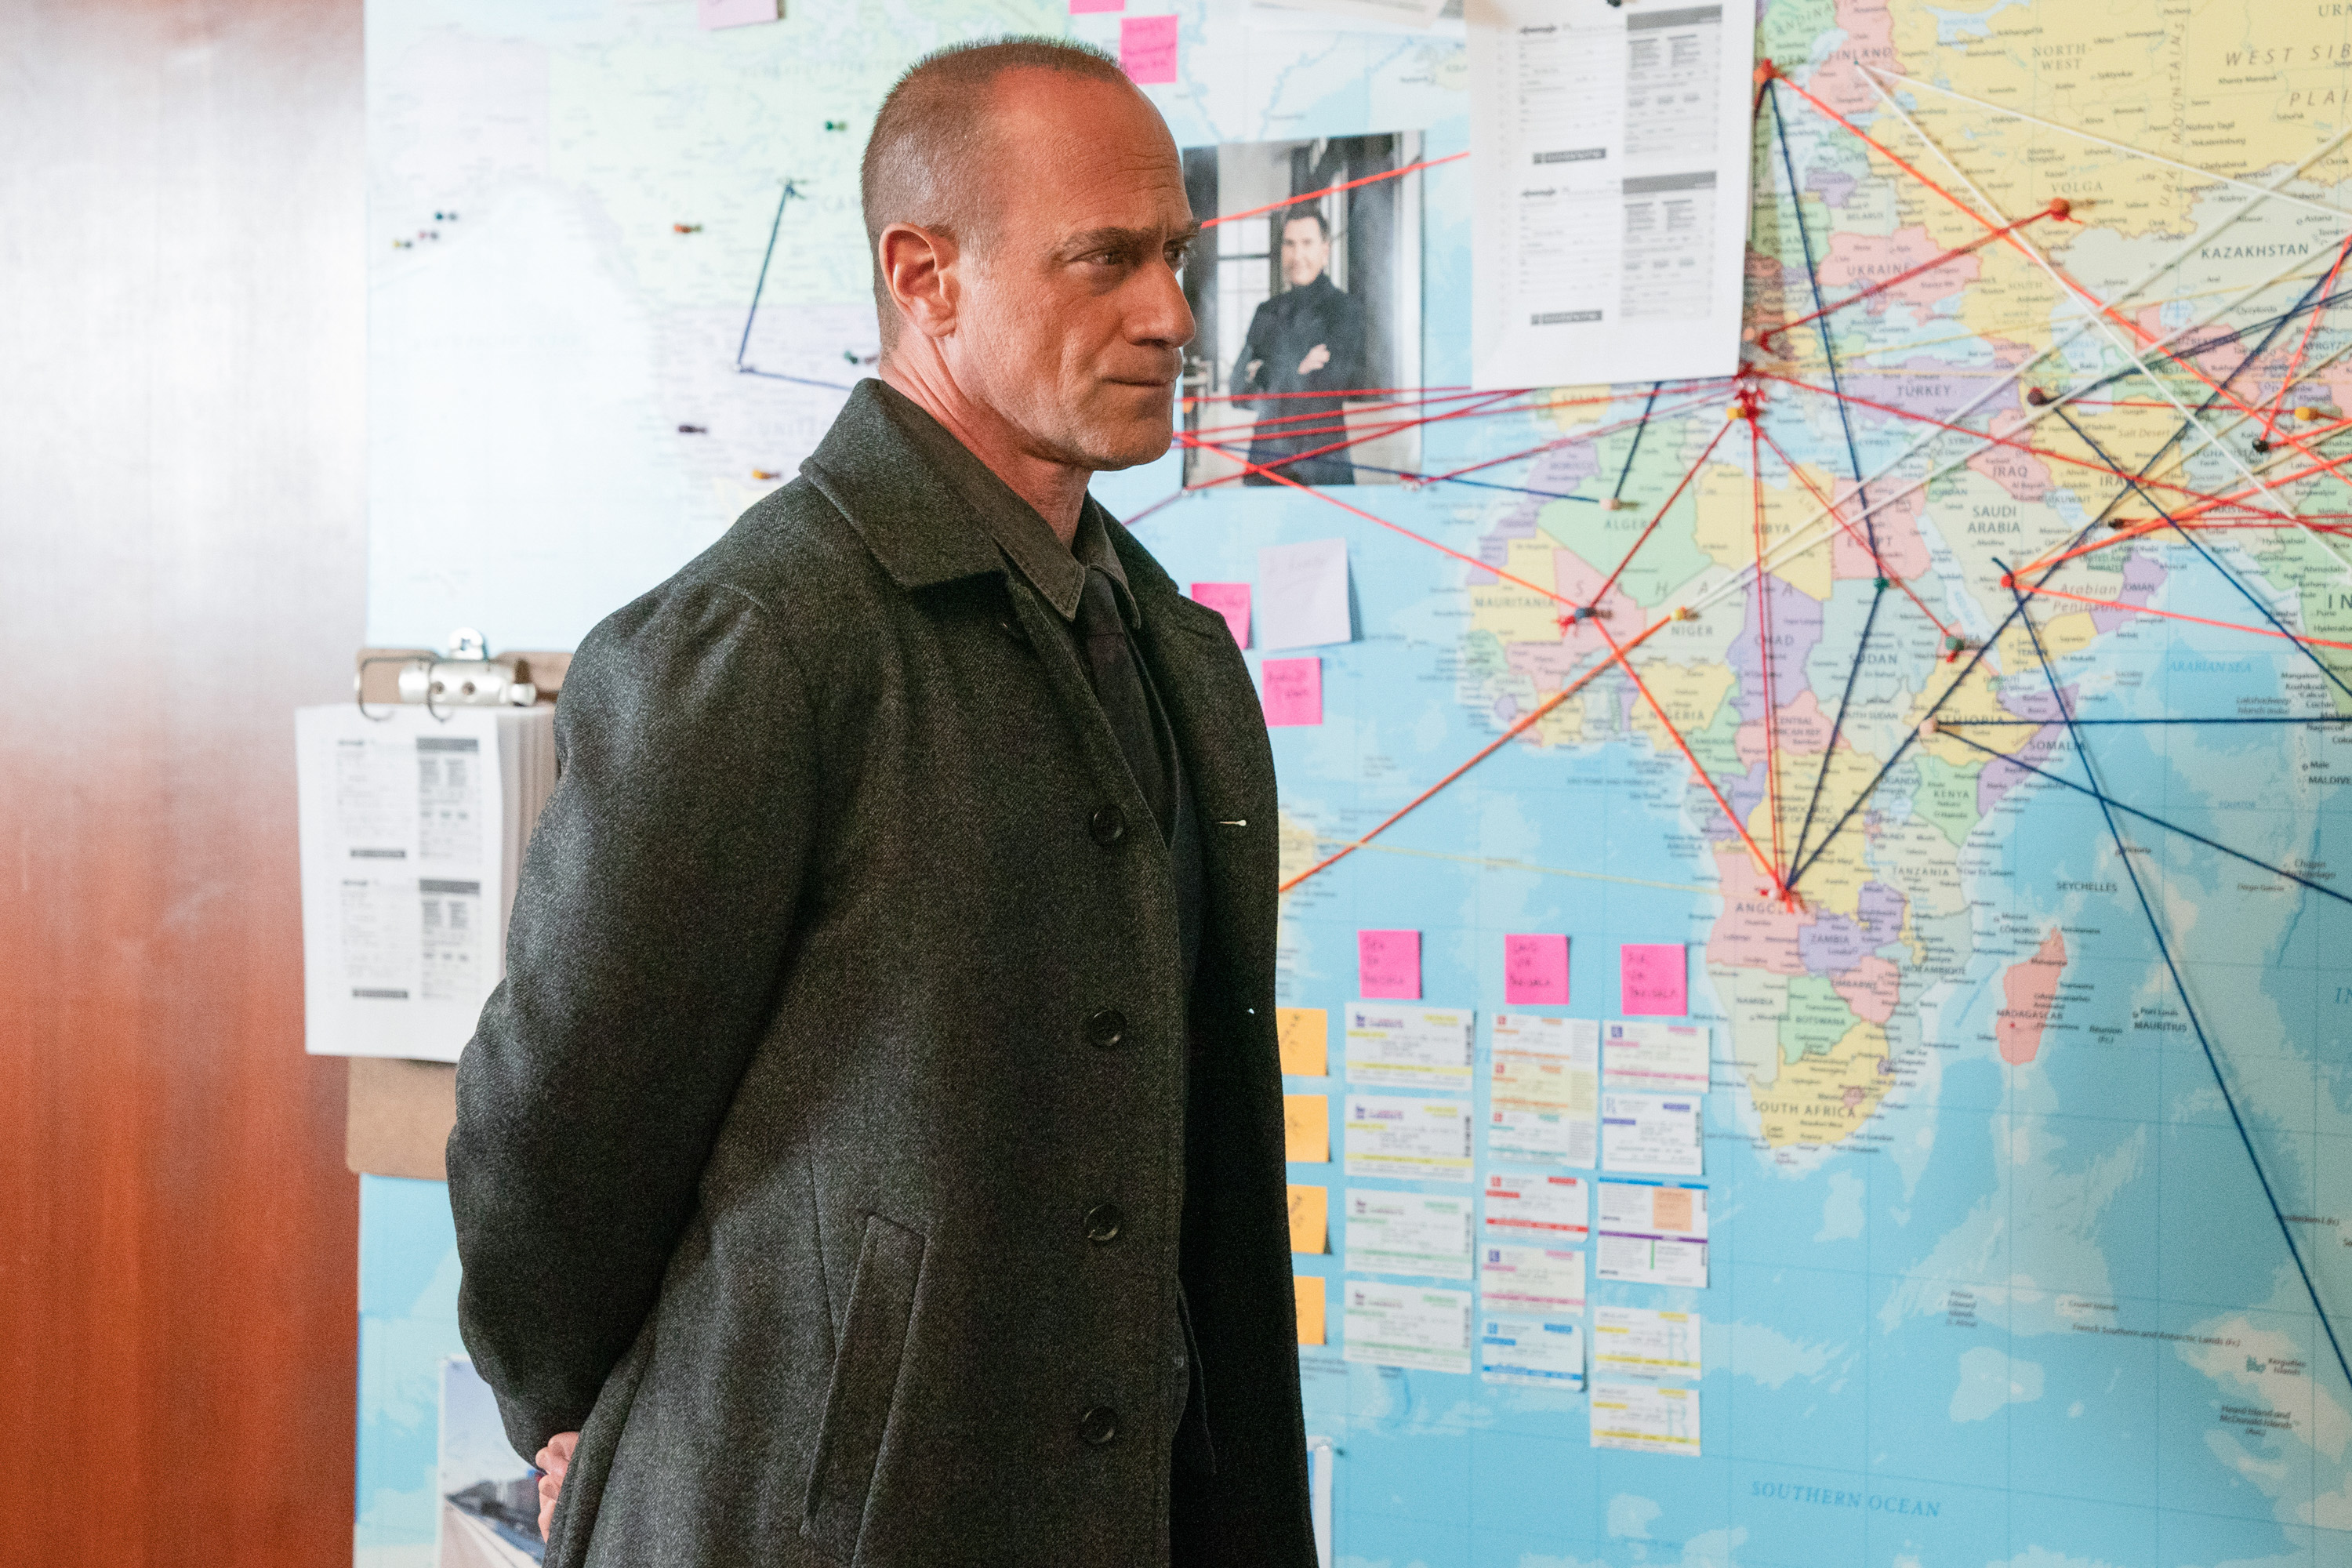 TV Tonight Detective Elliot Stabler works on a complicated case.